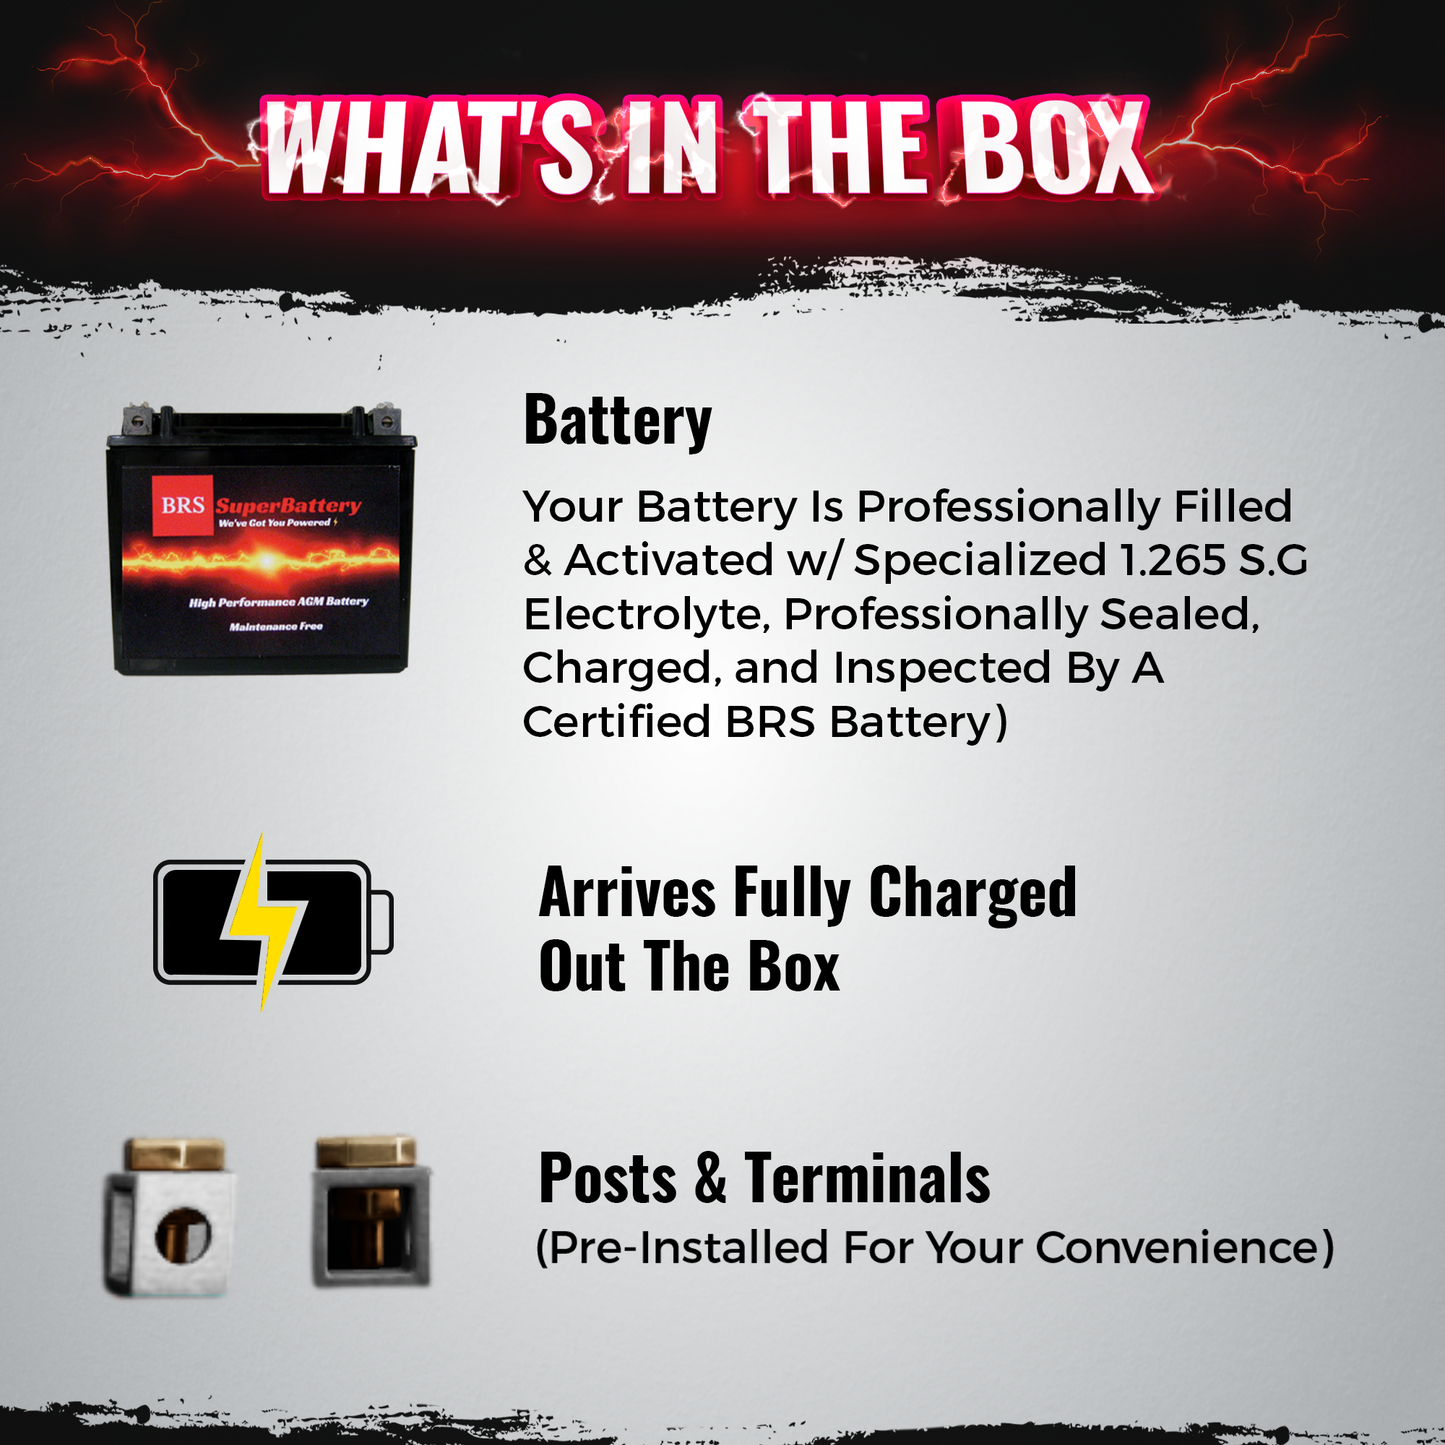 BRS30L-BS 12v High Performance Sealed AGM PowerSport 2 Year Battery - BRS Super Battery